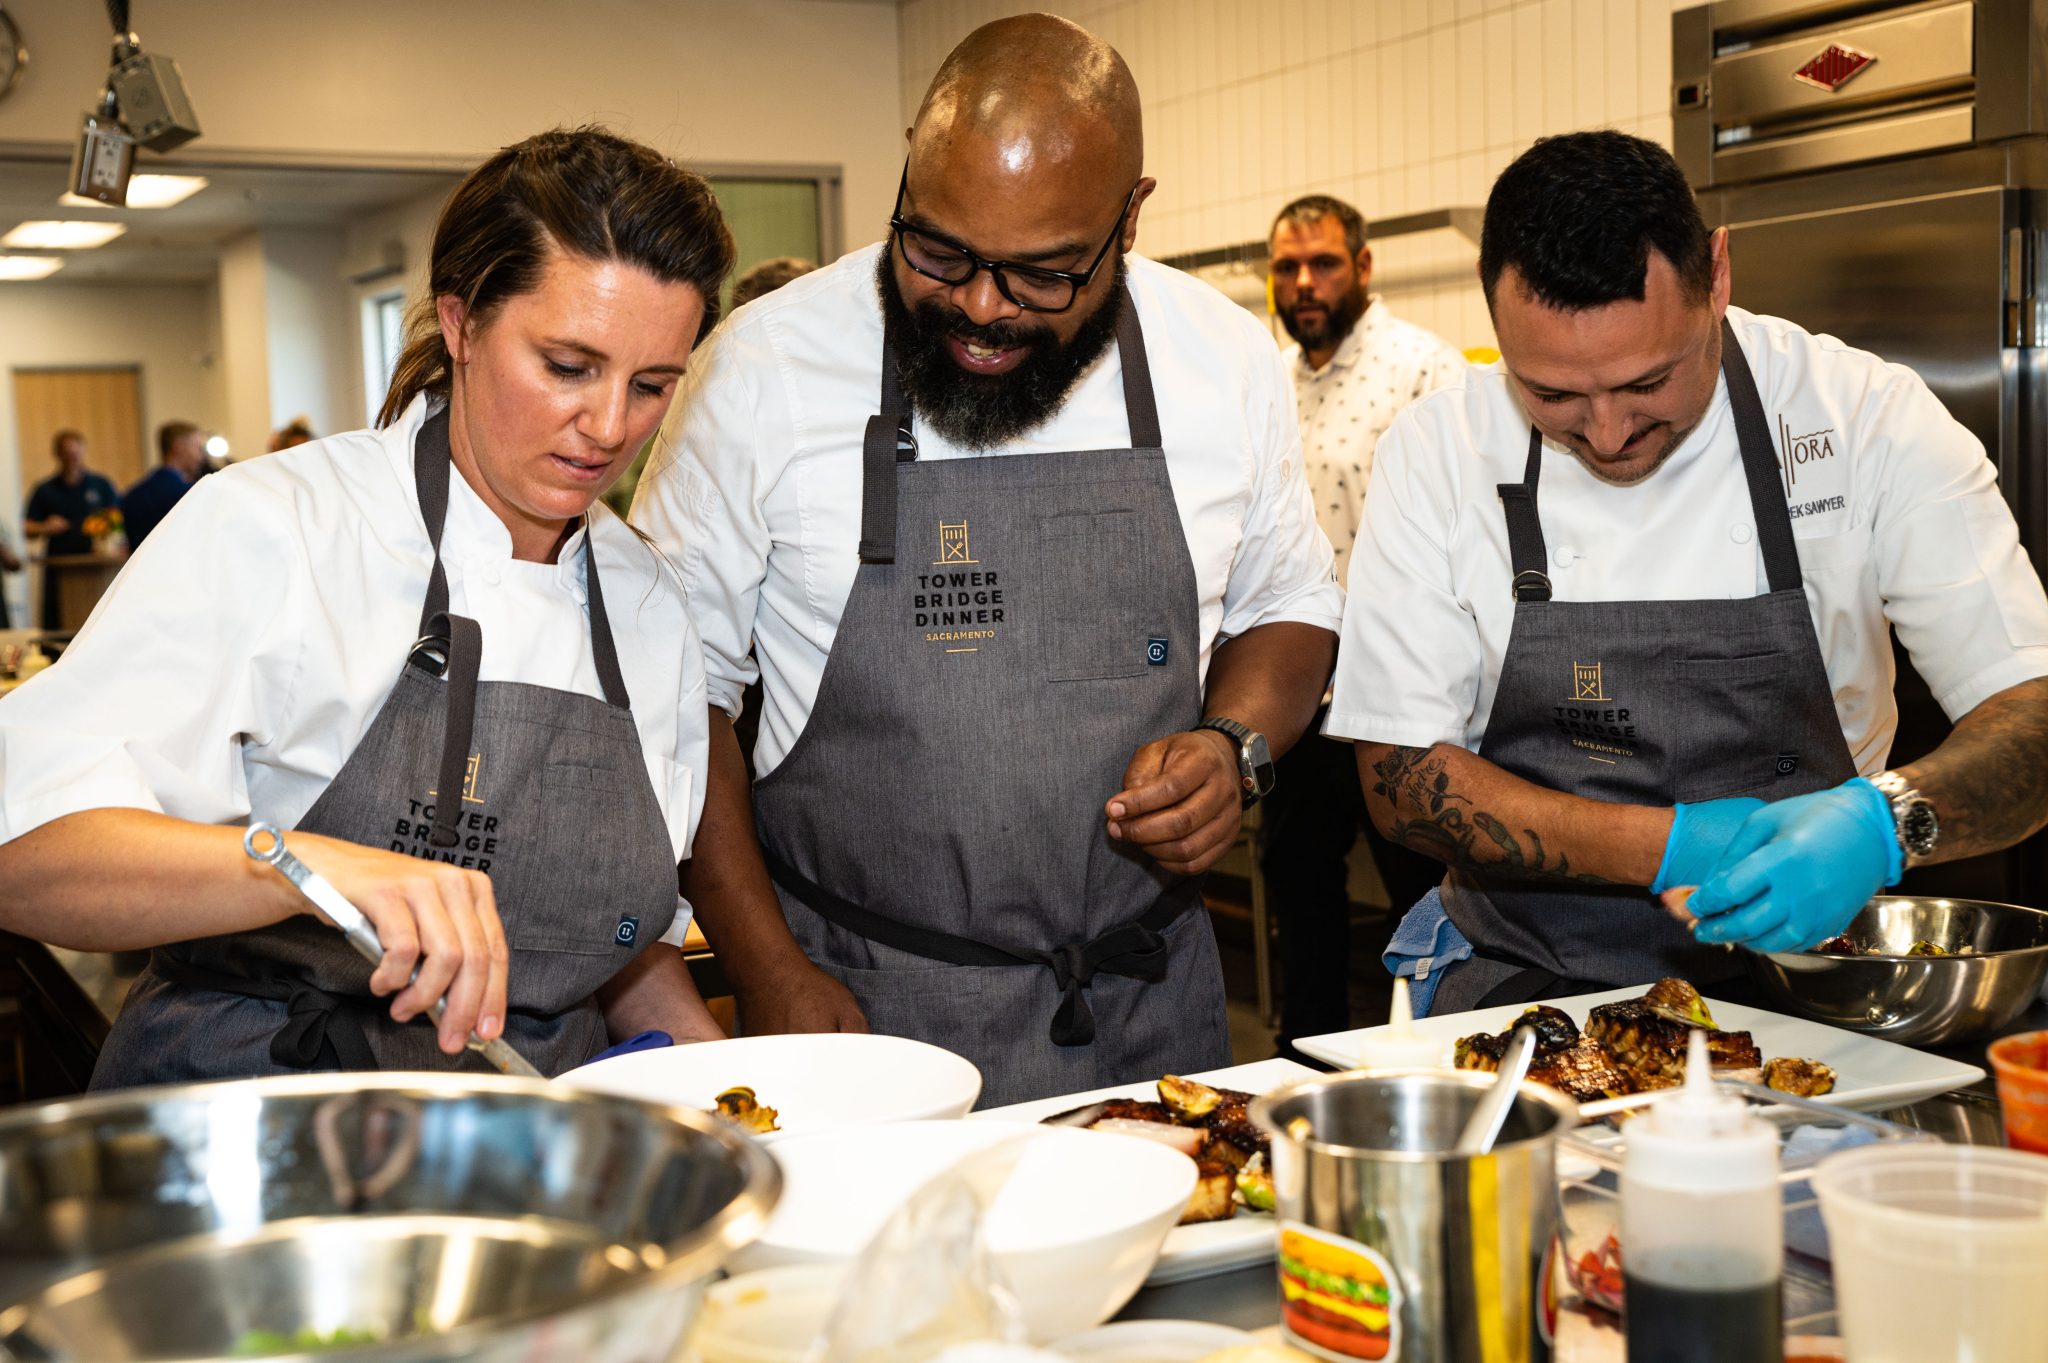 Reb ecca Campbell, Dennis Sydnor, Derek Sawyer, cooking, together, fun, friends, gloves, preparation, Farm to fork festival, sacramento, california, gourmet food, chefs, men and woman, people of color, uniforms, friends, fun, happy, cooks, preview dinner